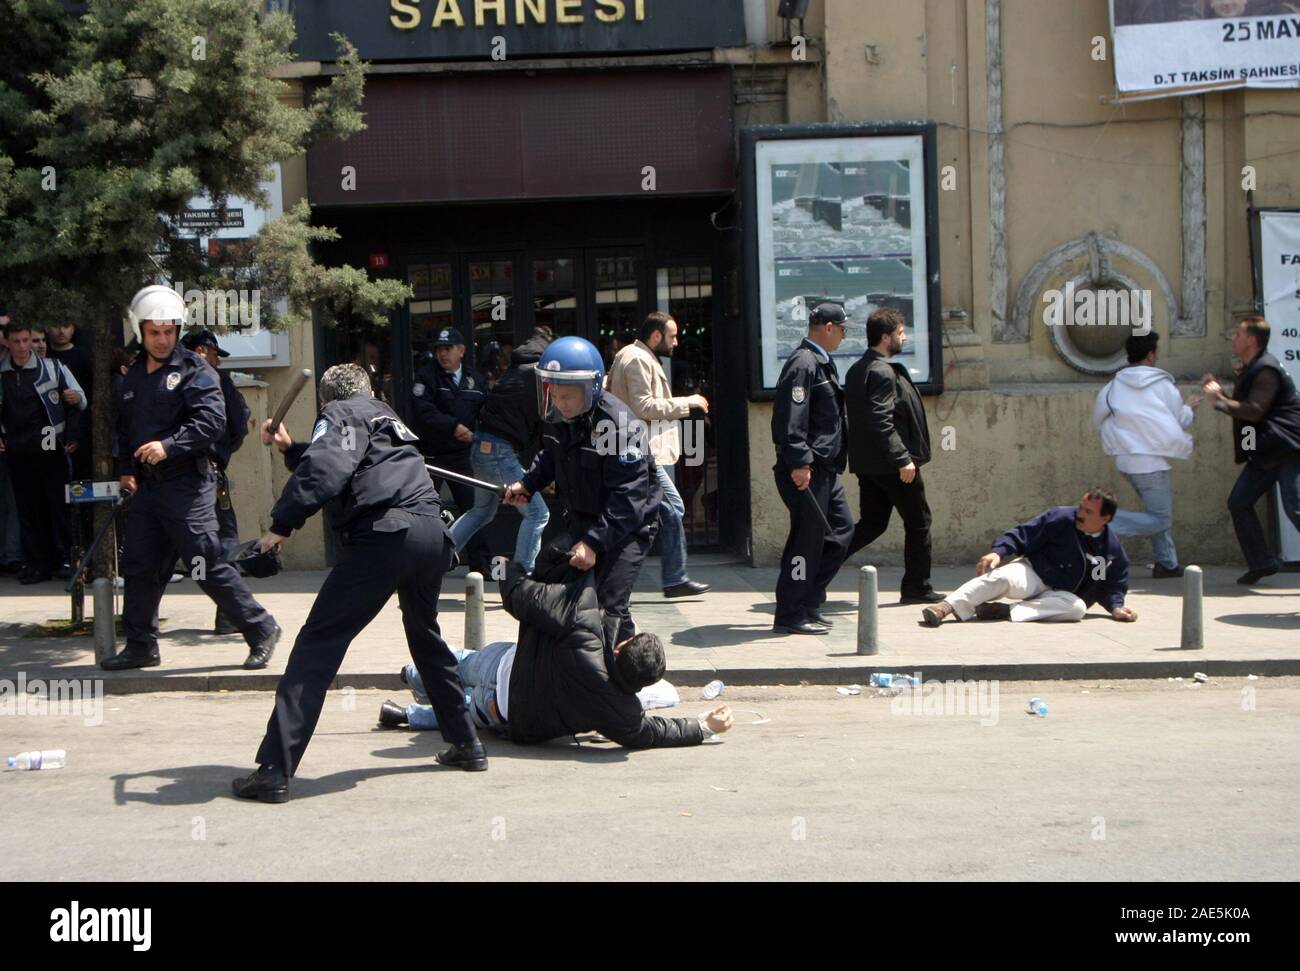 ISTANBUL, TURKEY - MAY 1: International Workers Day. Turkish riot police officers detain a protester on May 1, 2007 in Istanbul, Turkey. Taksim Square is the center of the protest and celebrations. Stock Photo